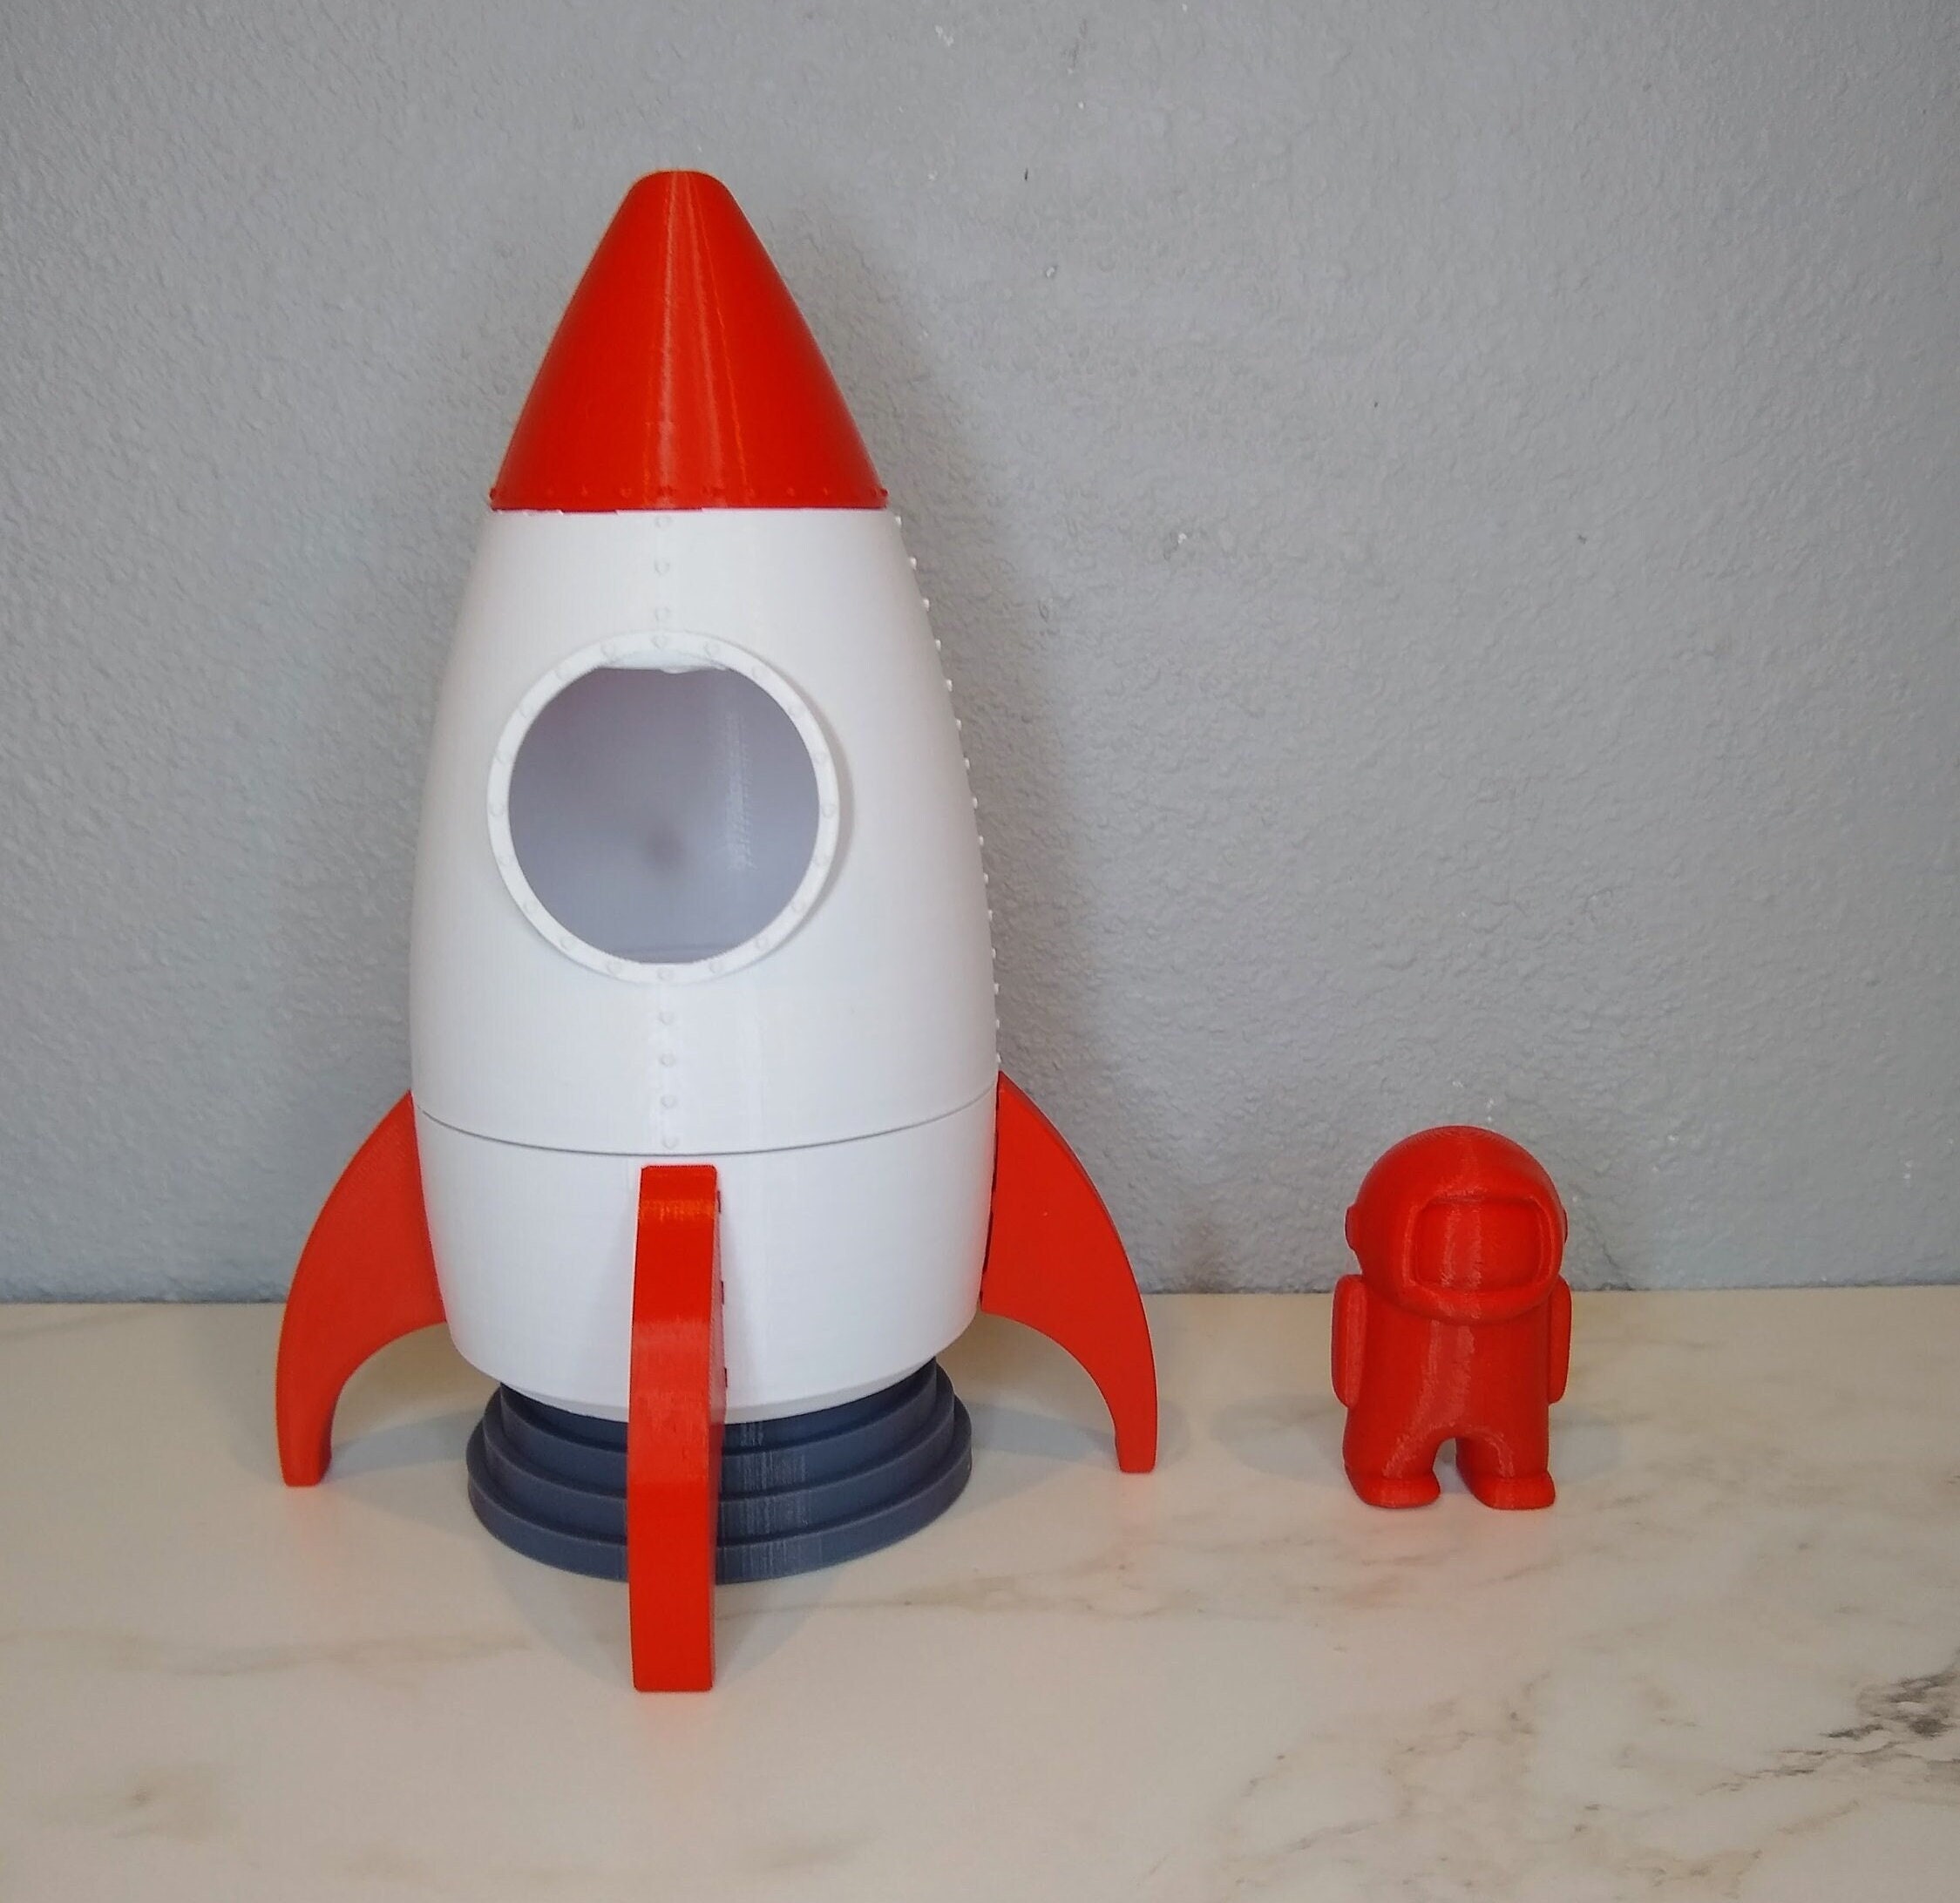 Rocket Ship With Astronaut / Toy Rocket / 3D Printed 